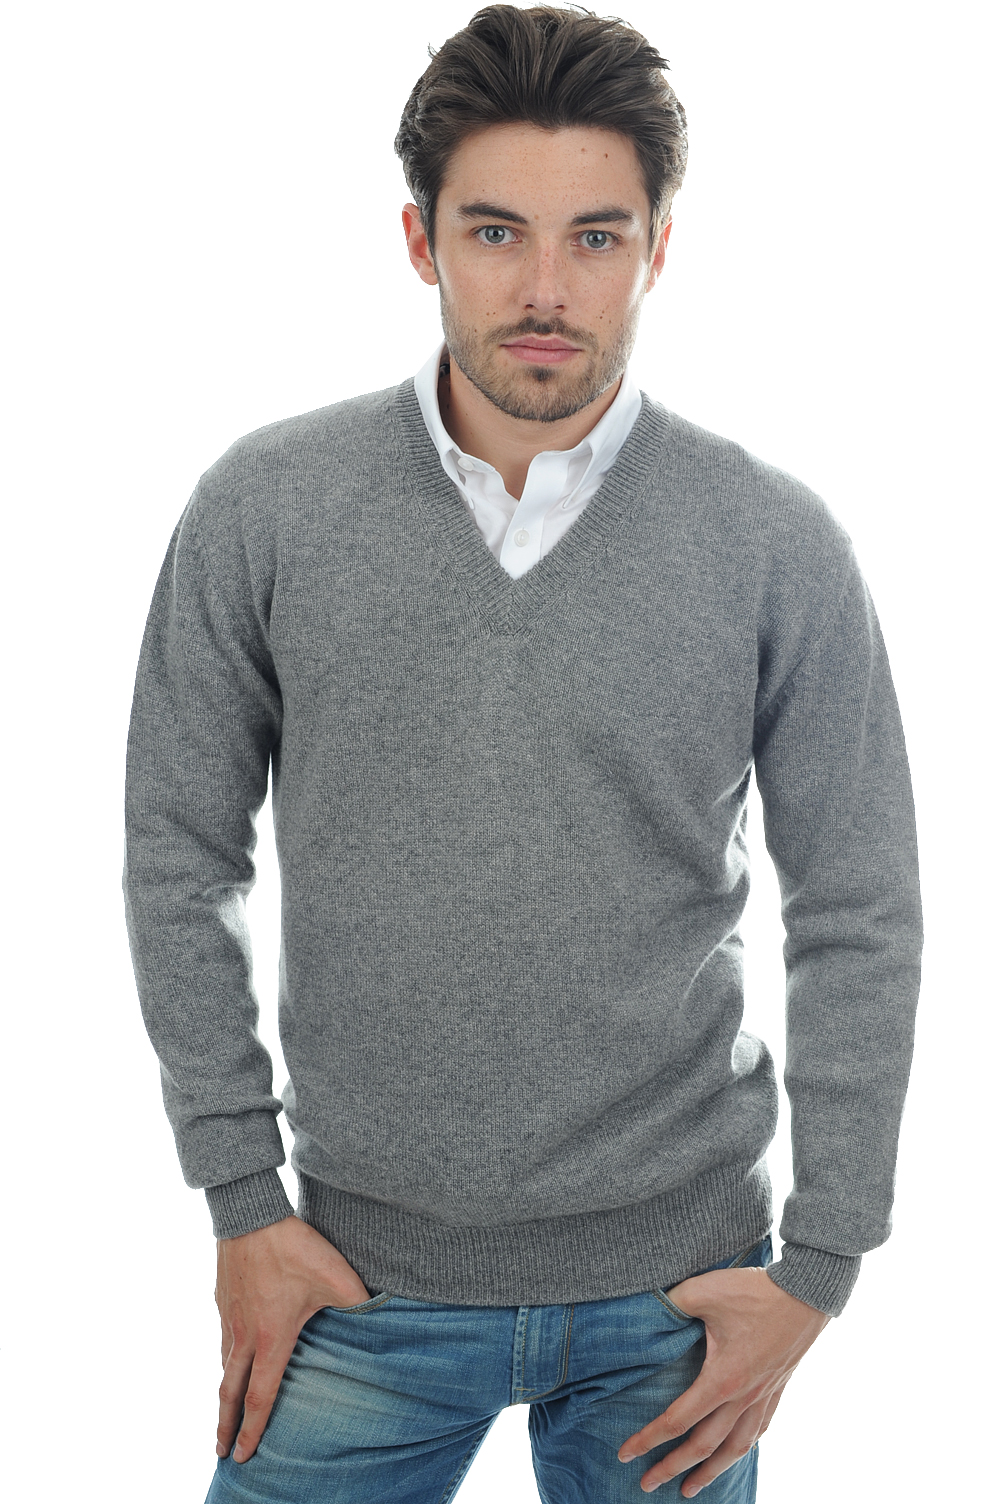 Cachemire pull homme hippolyte 4f gris chine xl